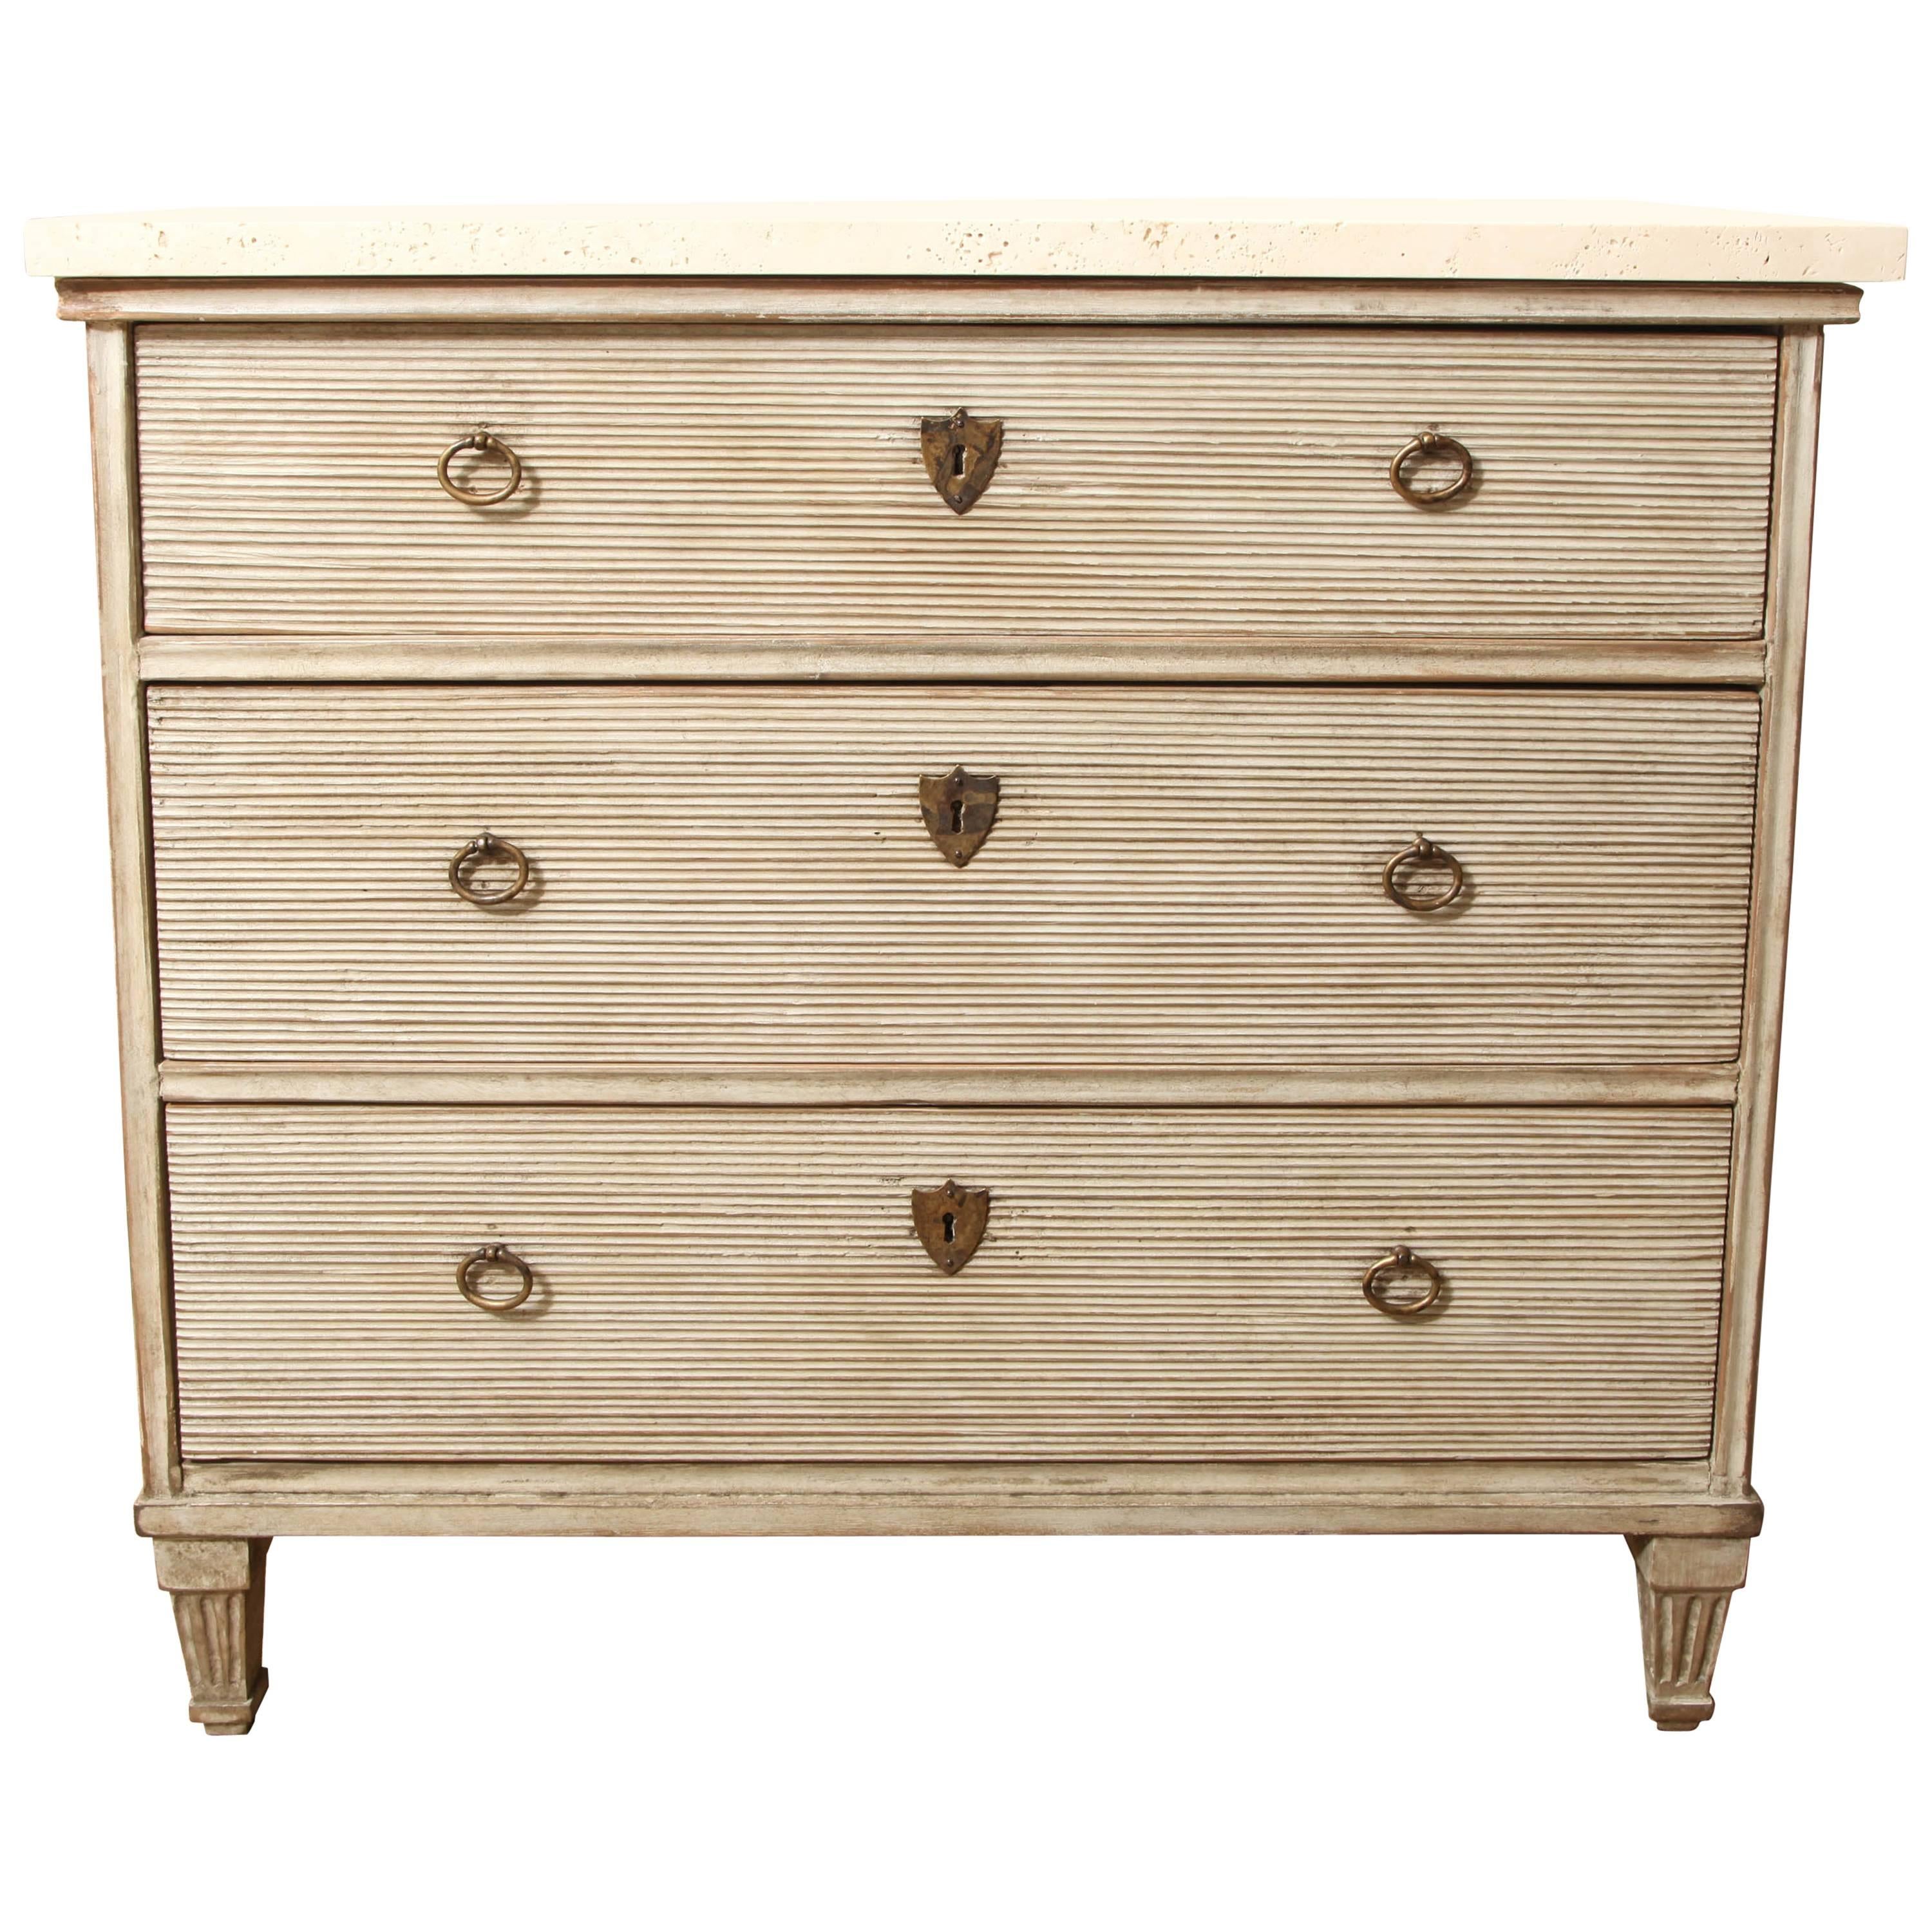 19th Century Painted Swedish Commode with Travertine Top